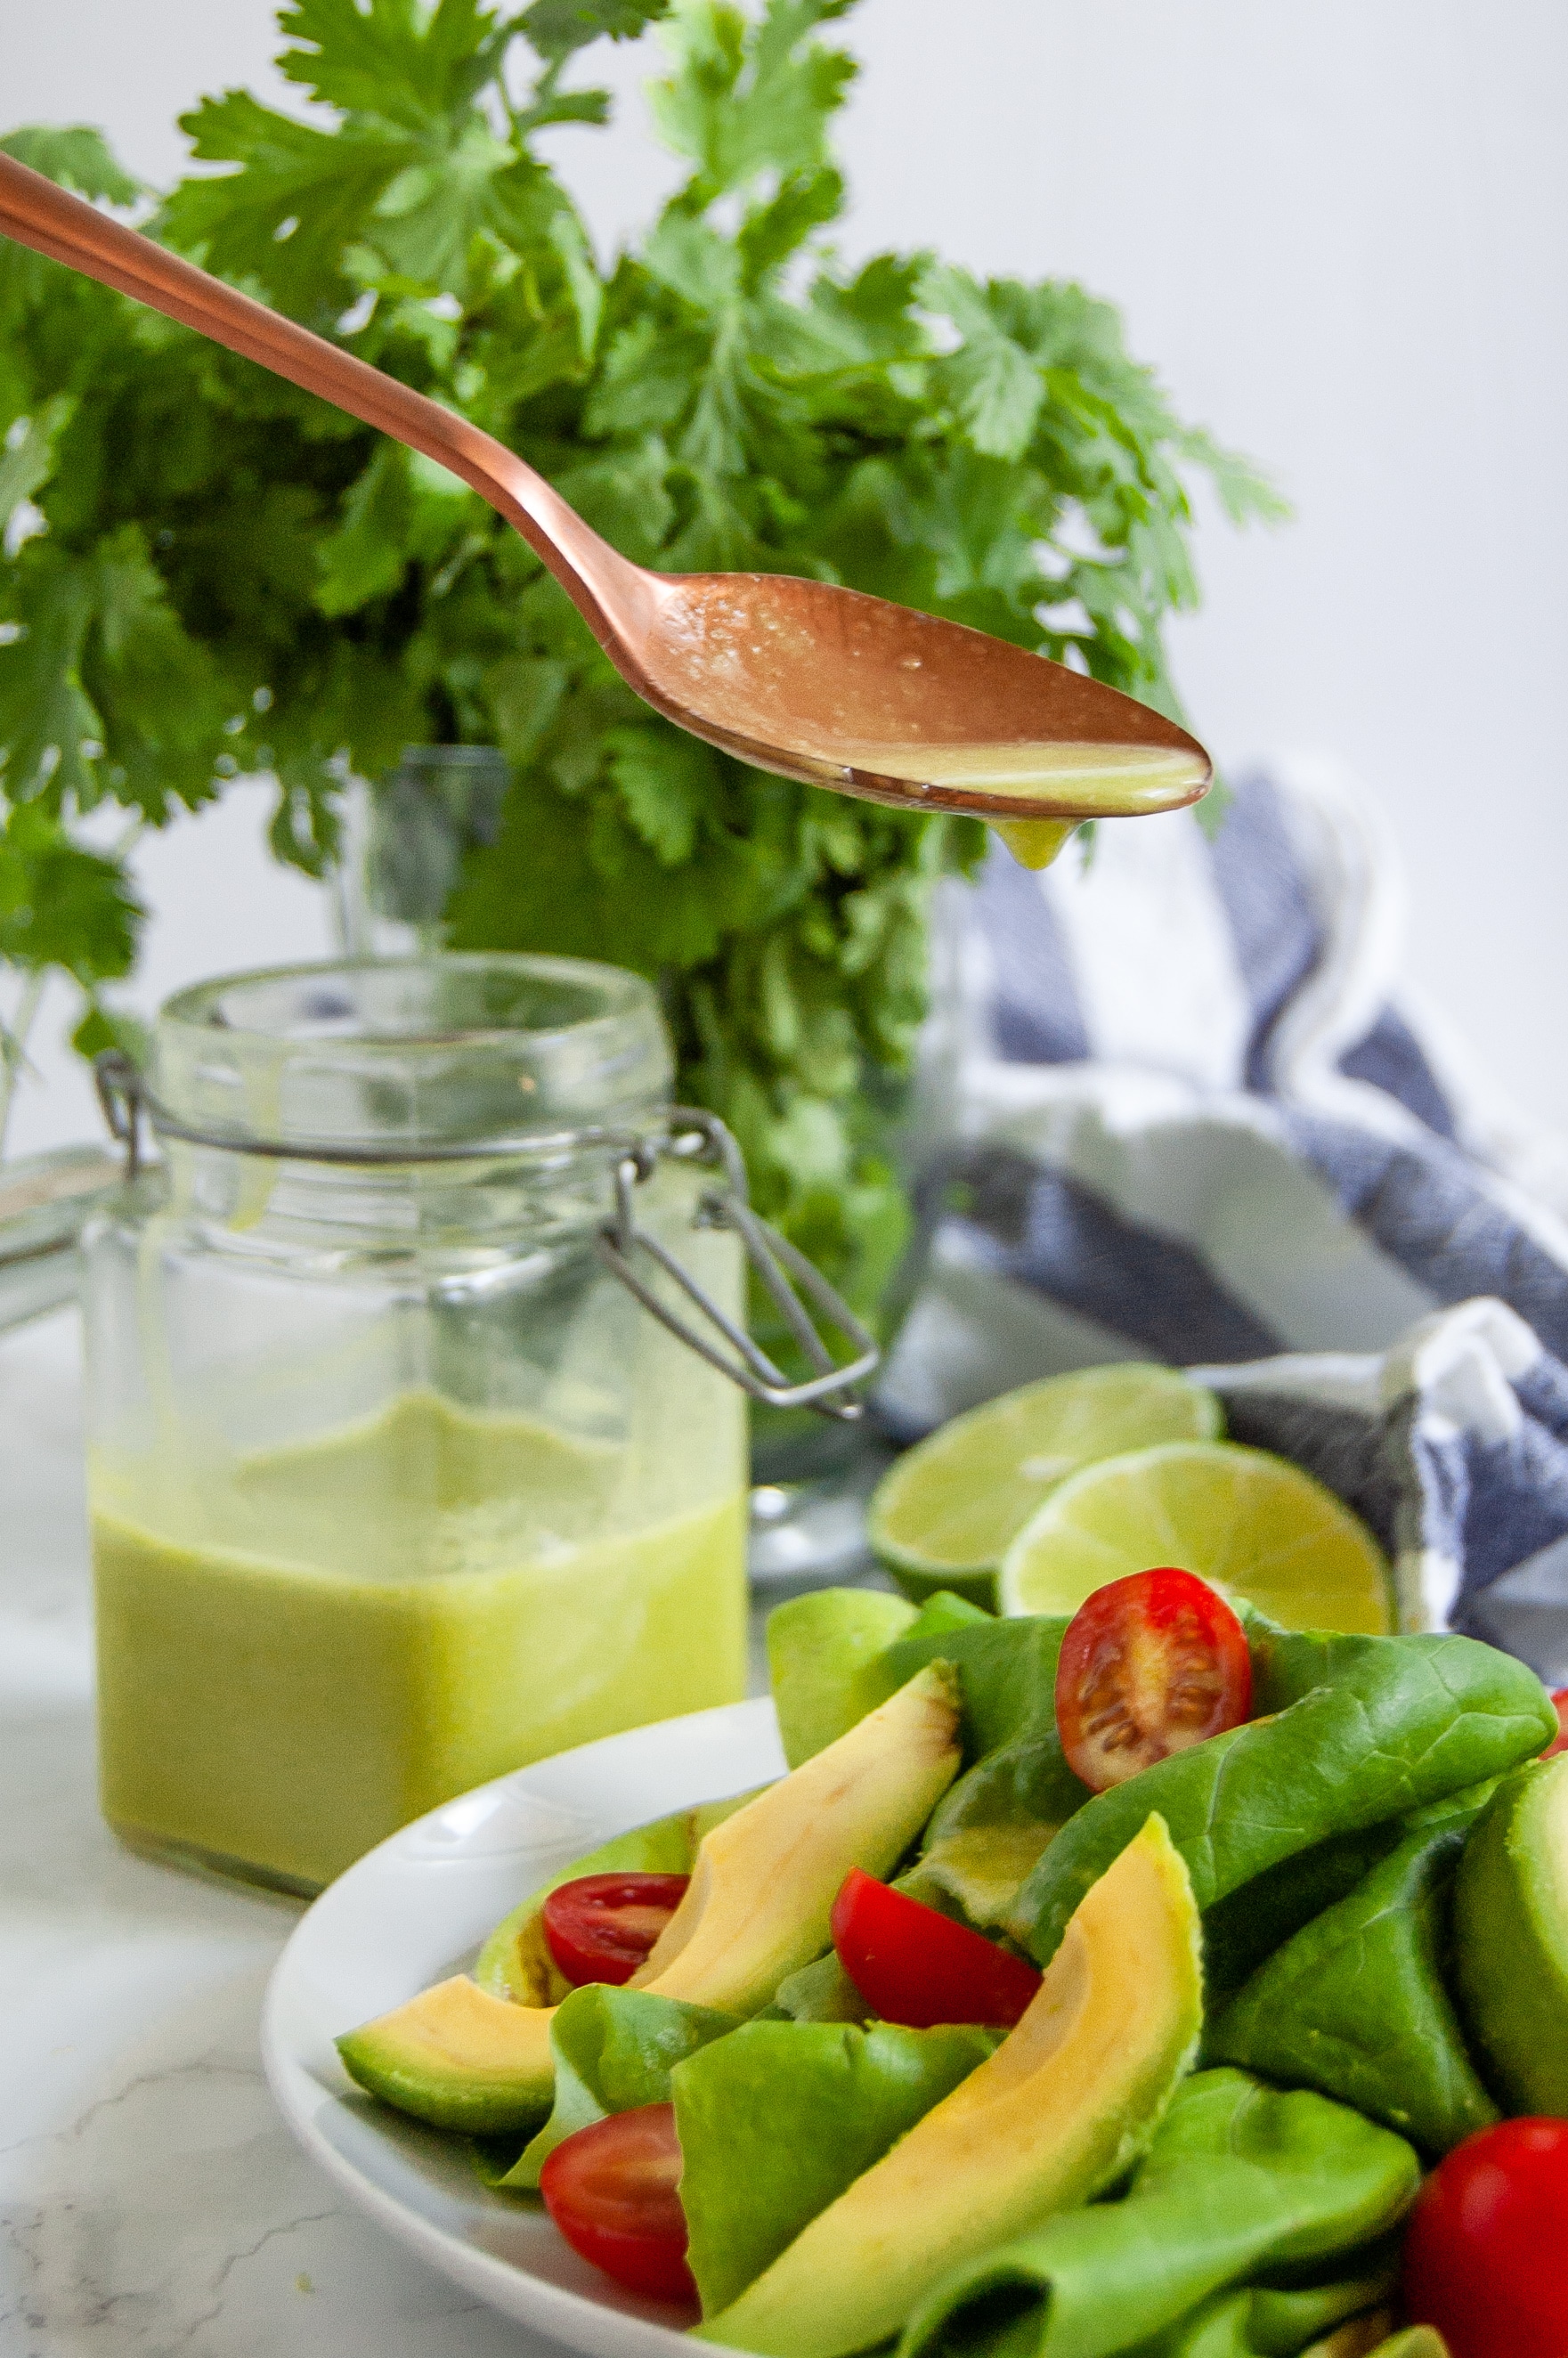 Cilantro lime dressing is a flavor-packed healthy salad dressing that needs just a handful of simple ingredients.